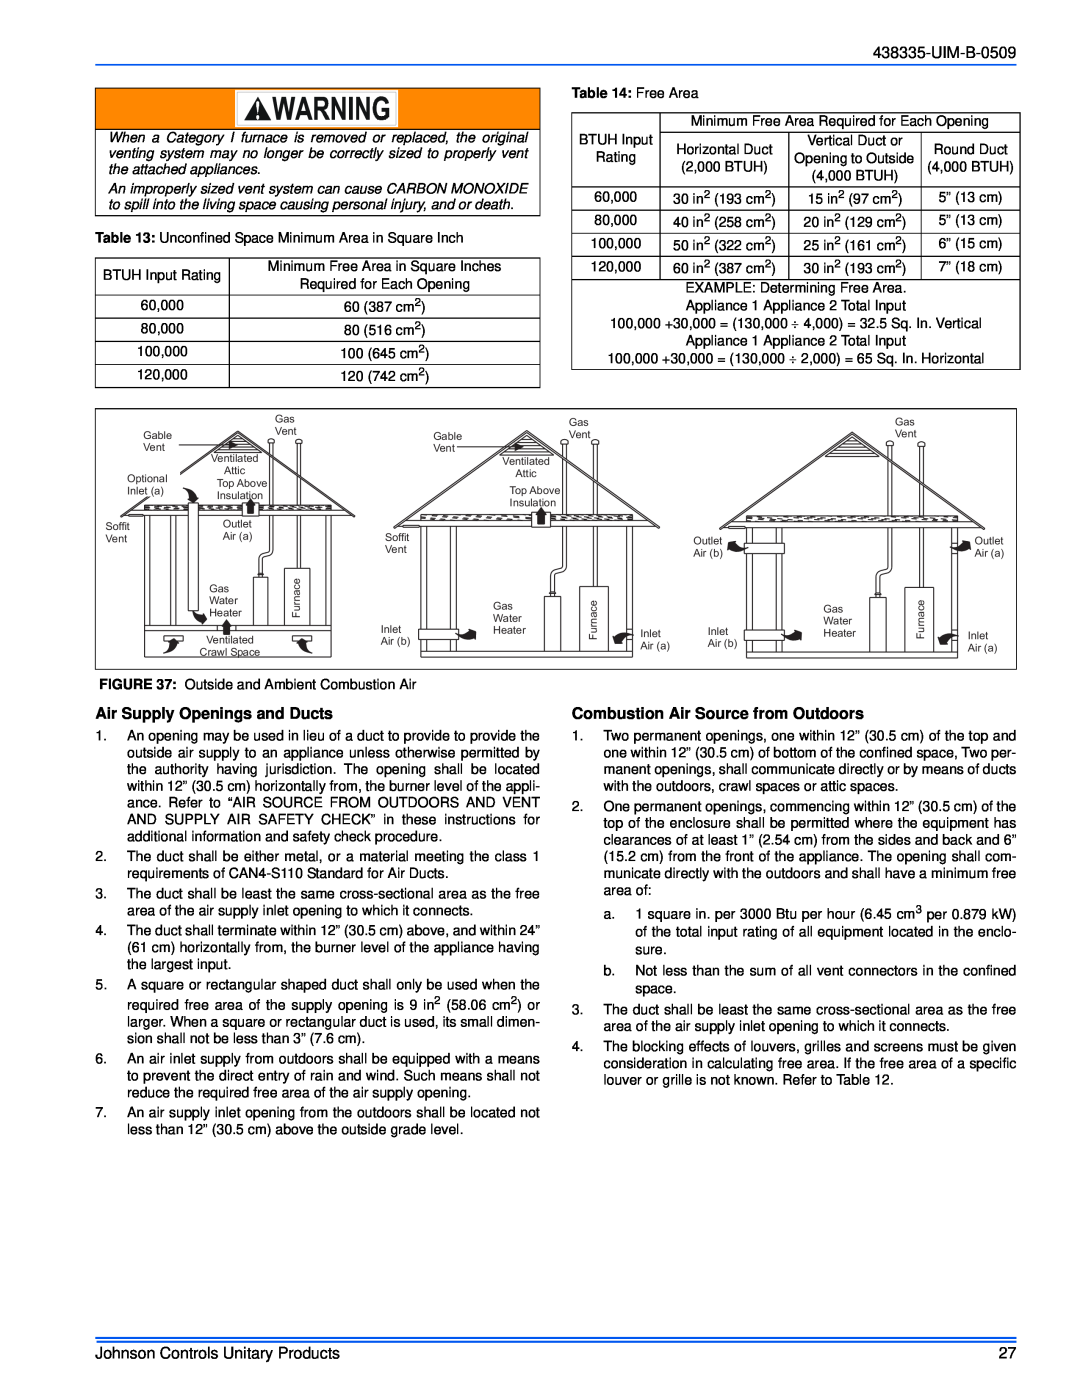 Johnson Controls TM9V MP installation manual UIM-B-0509, Air Supply Openings and Ducts, Combustion Air Source from Outdoors 